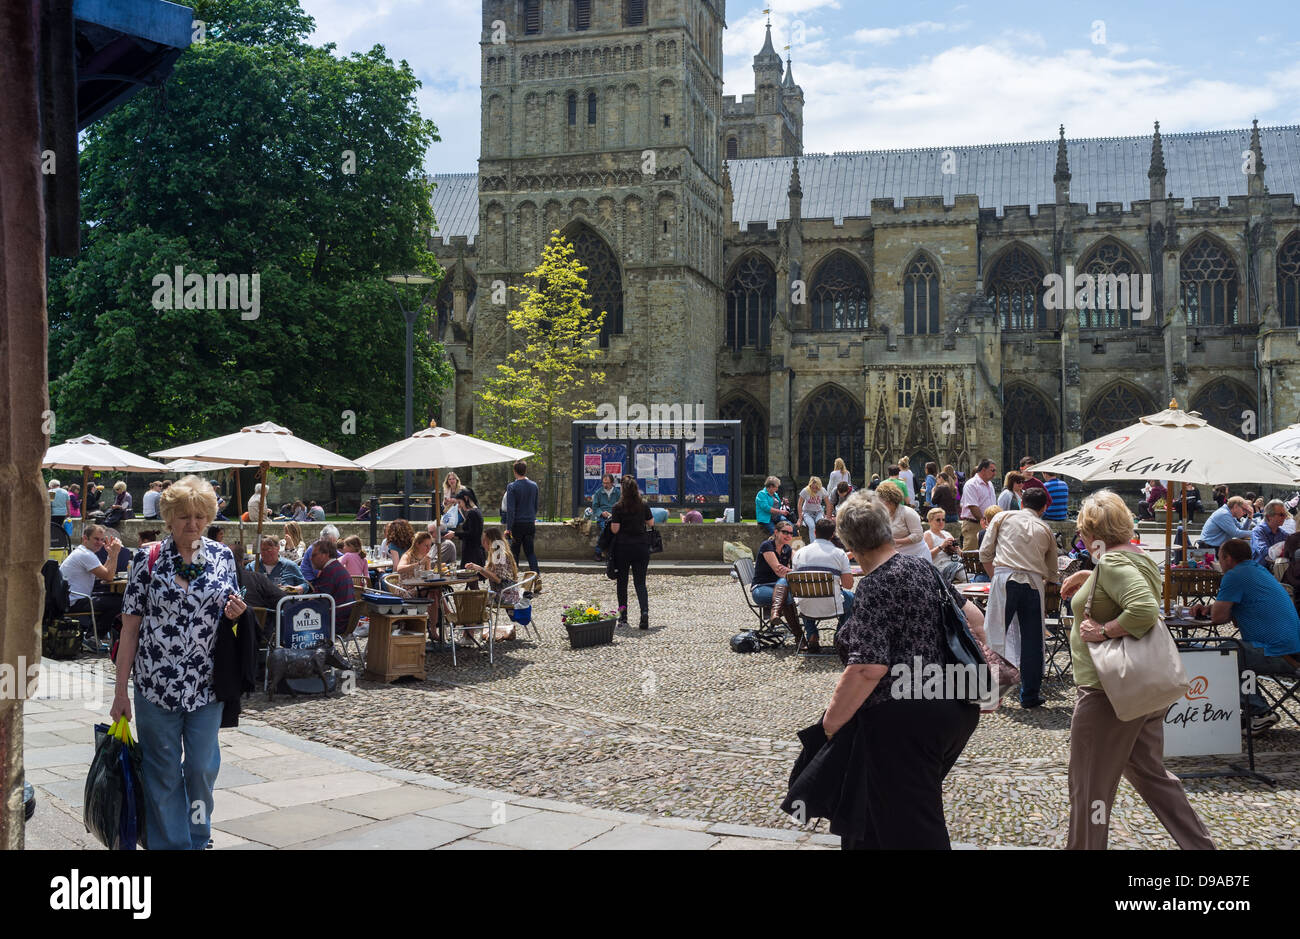 Exeter, Devon, England. May 30th 2013. Exeter Cathedral on a busy day with shoppers and diners outside in the Cathedral yard. Stock Photo